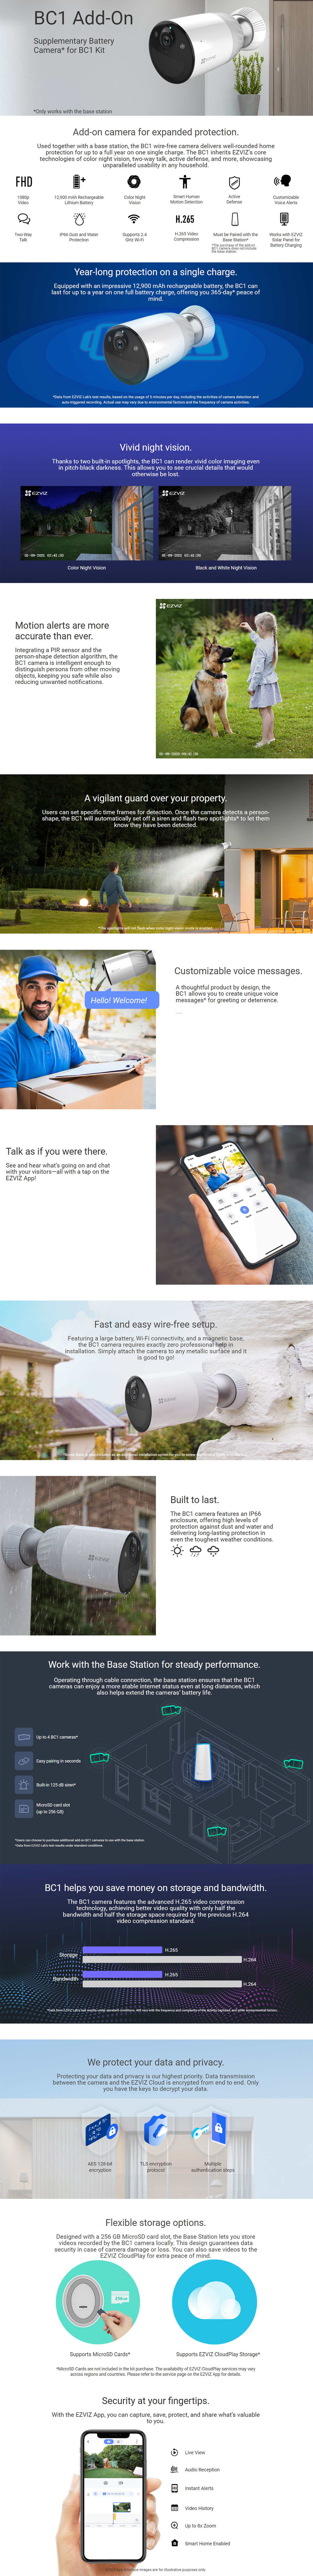 Security-Cameras-EZVIZ-BC1-Full-HD-1080P-12900mAH-Wire-Free-Security-Camera-with-AI-Human-Detection-and-Color-Night-Vision-4